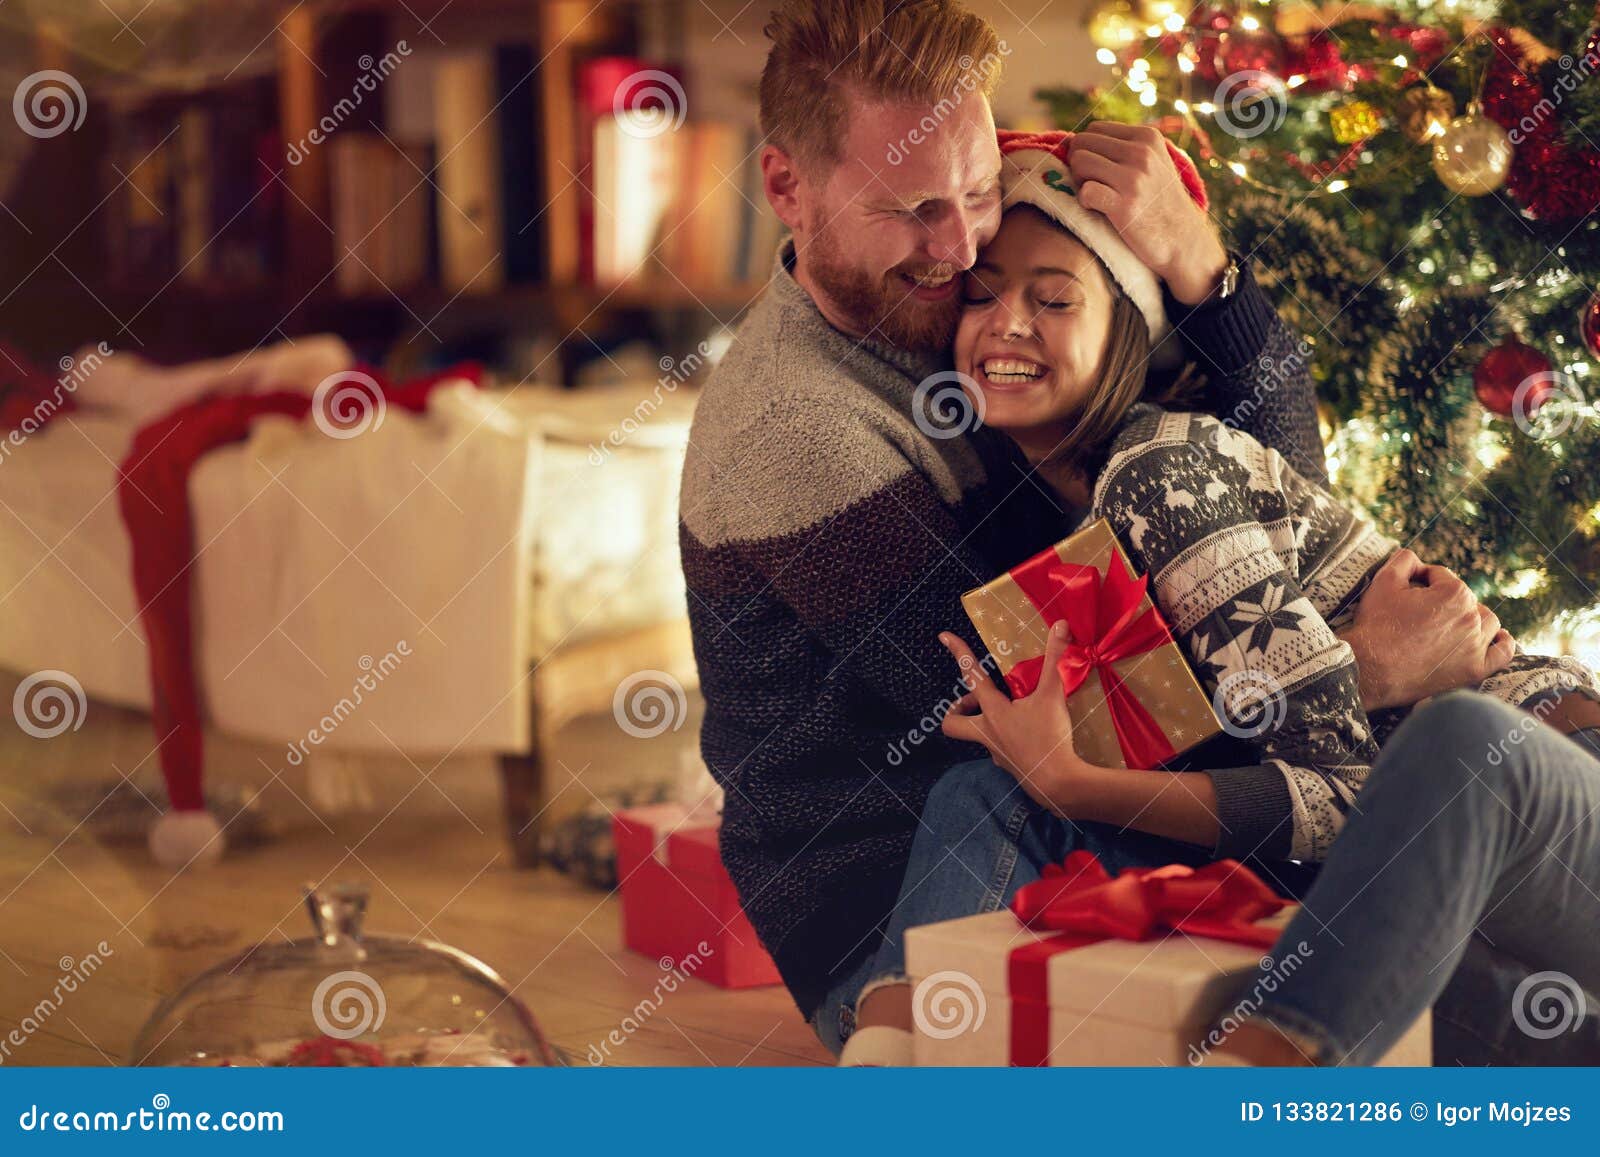 love, happiness for christmas, concept- romantic couple in love